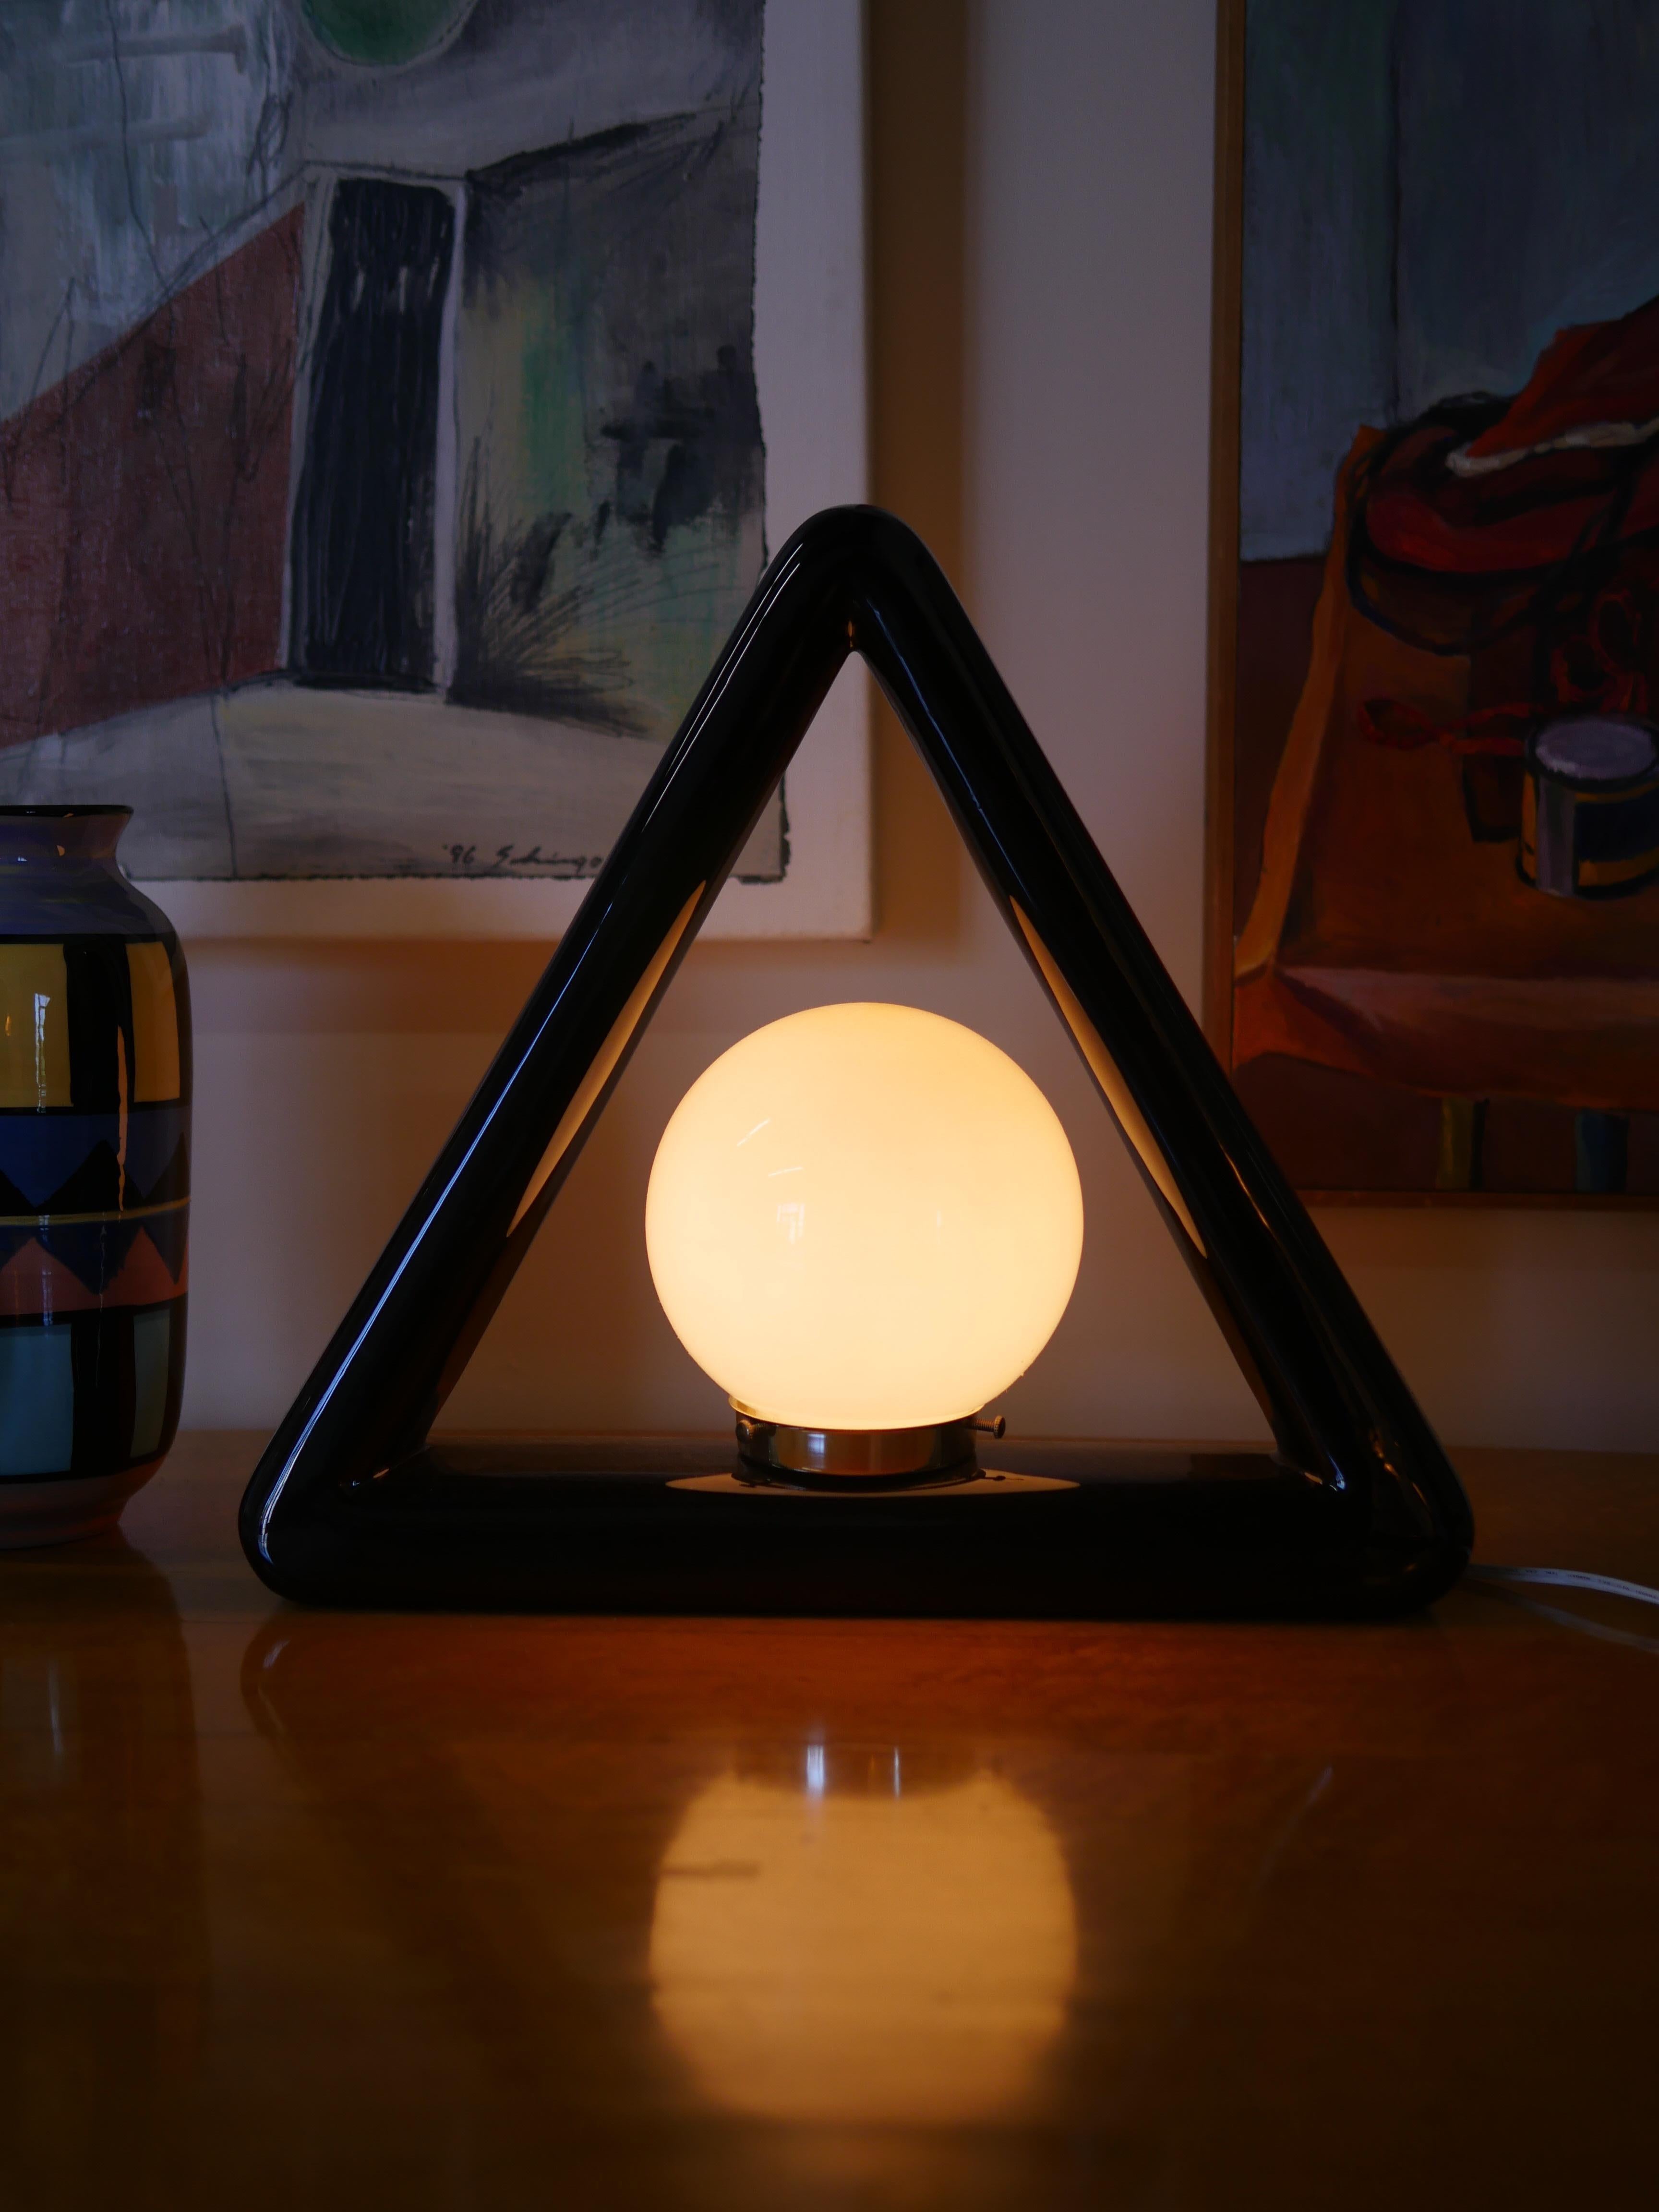 Cool geometric postmodern ceramic table lamp from the 1980s. In great working condition with no chips or major scratches to the ceramic frame.